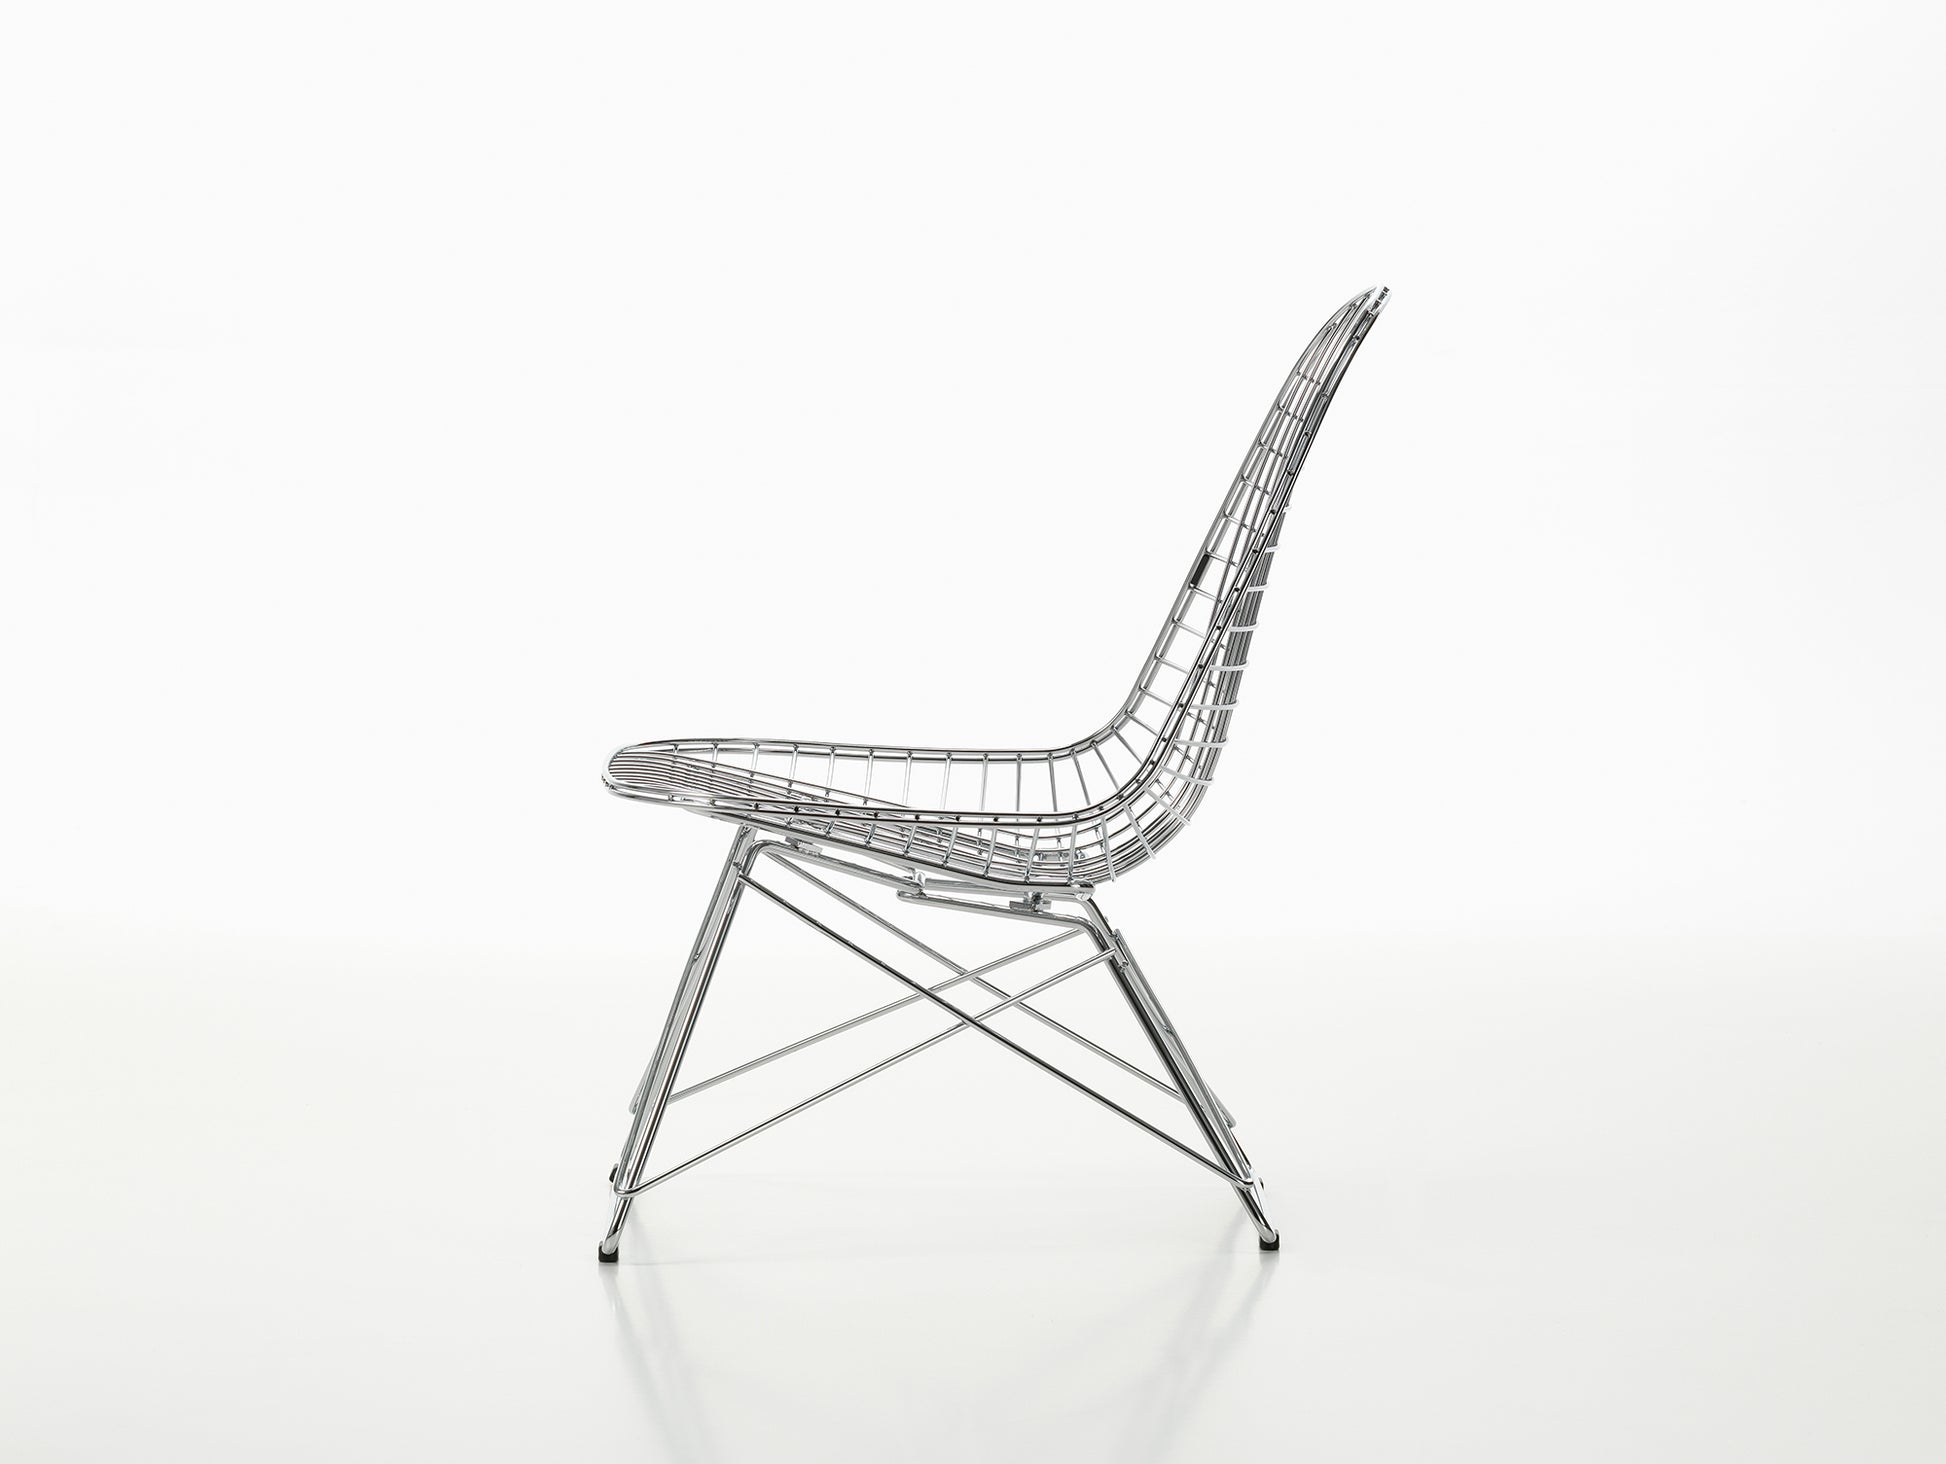 Eames LKR Wire Chair by Vitra - Chromed Powder-Coated Steel